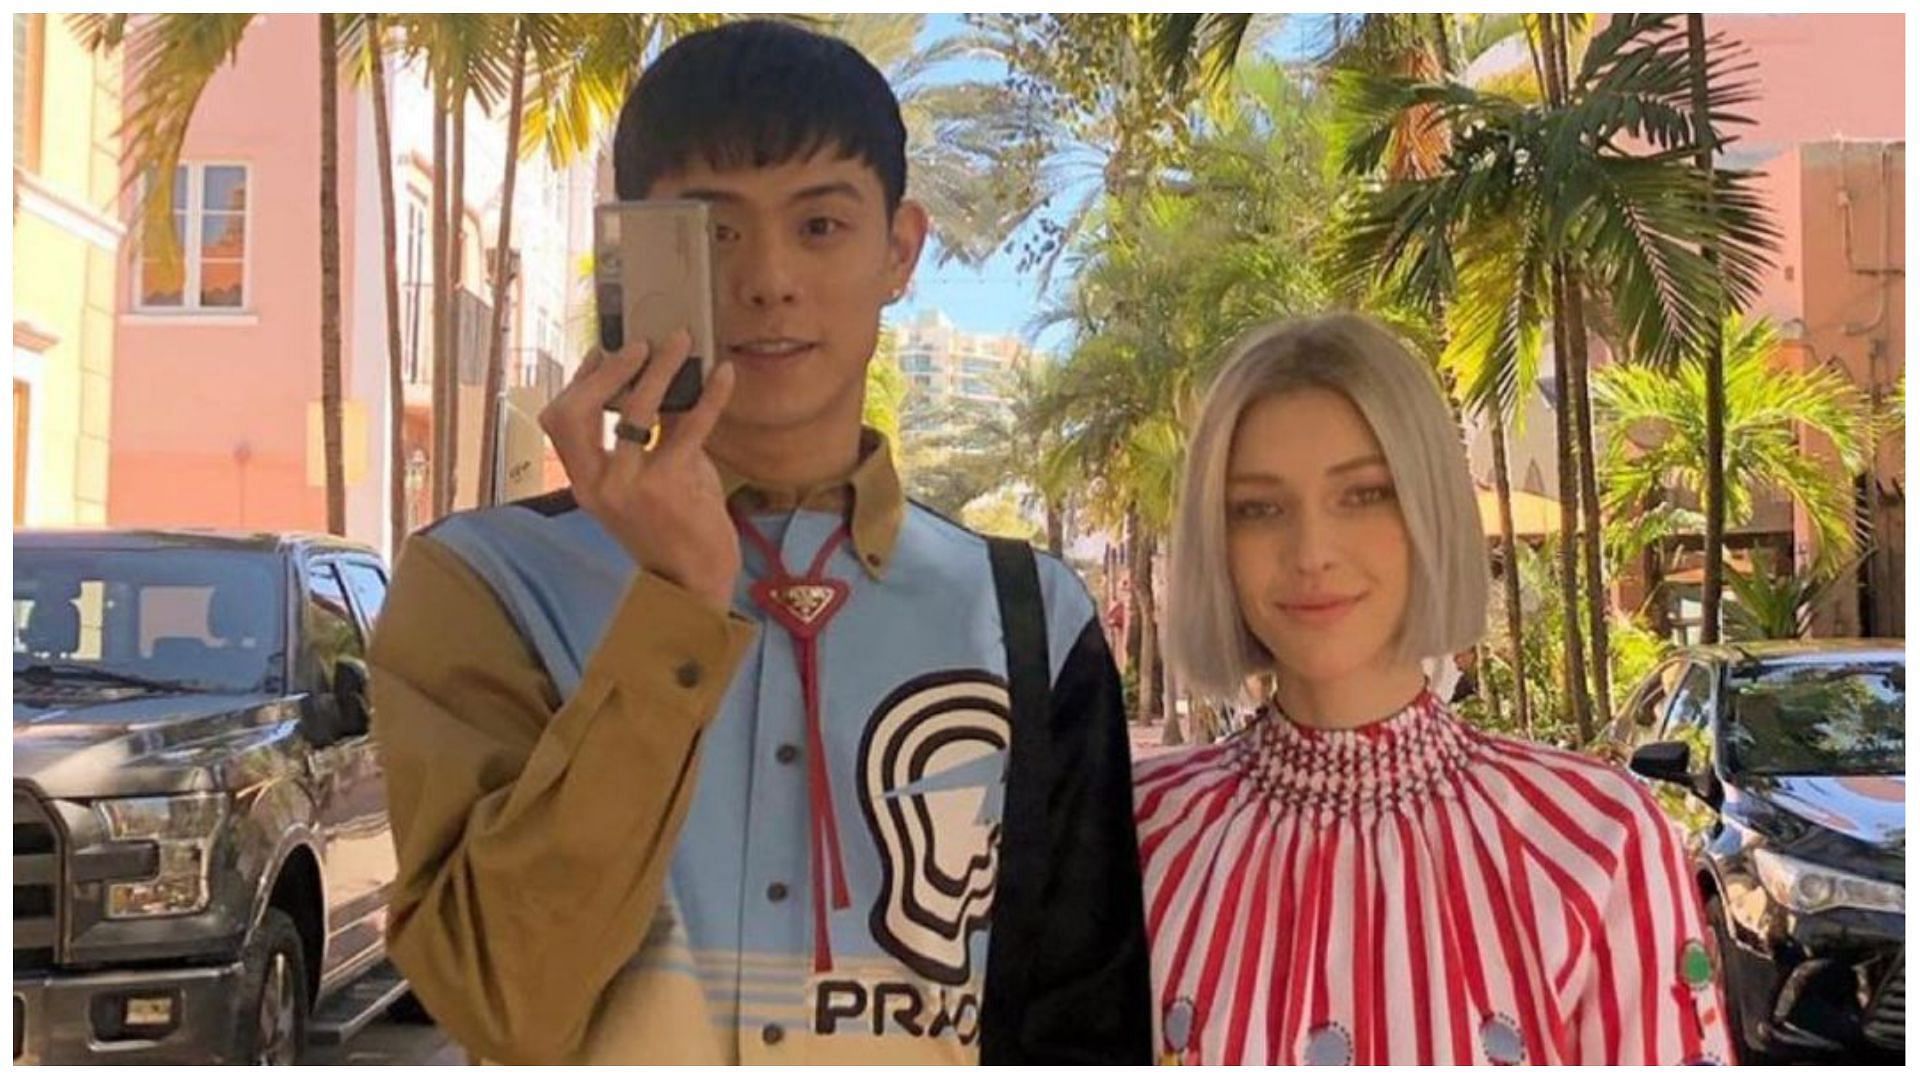 Beenzino and Stefanie Michova have been together since 2015 (Image via realisshoman/Instagram)